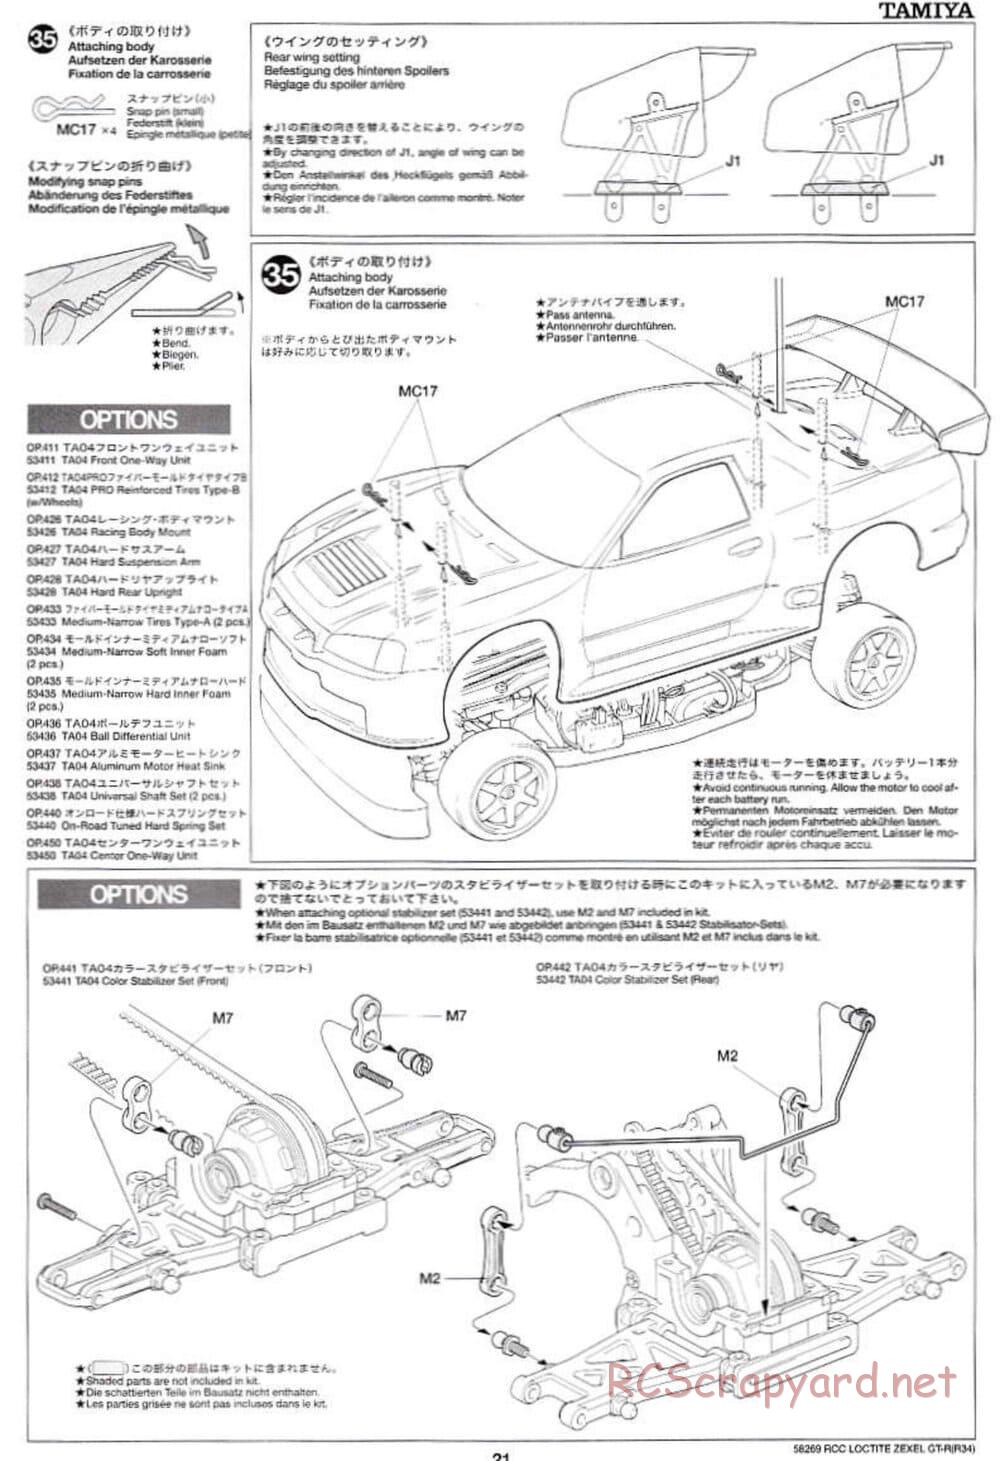 Tamiya - Loctite Zexel Skyline GT-R (R34) - TA-04 Chassis - Manual - Page 21